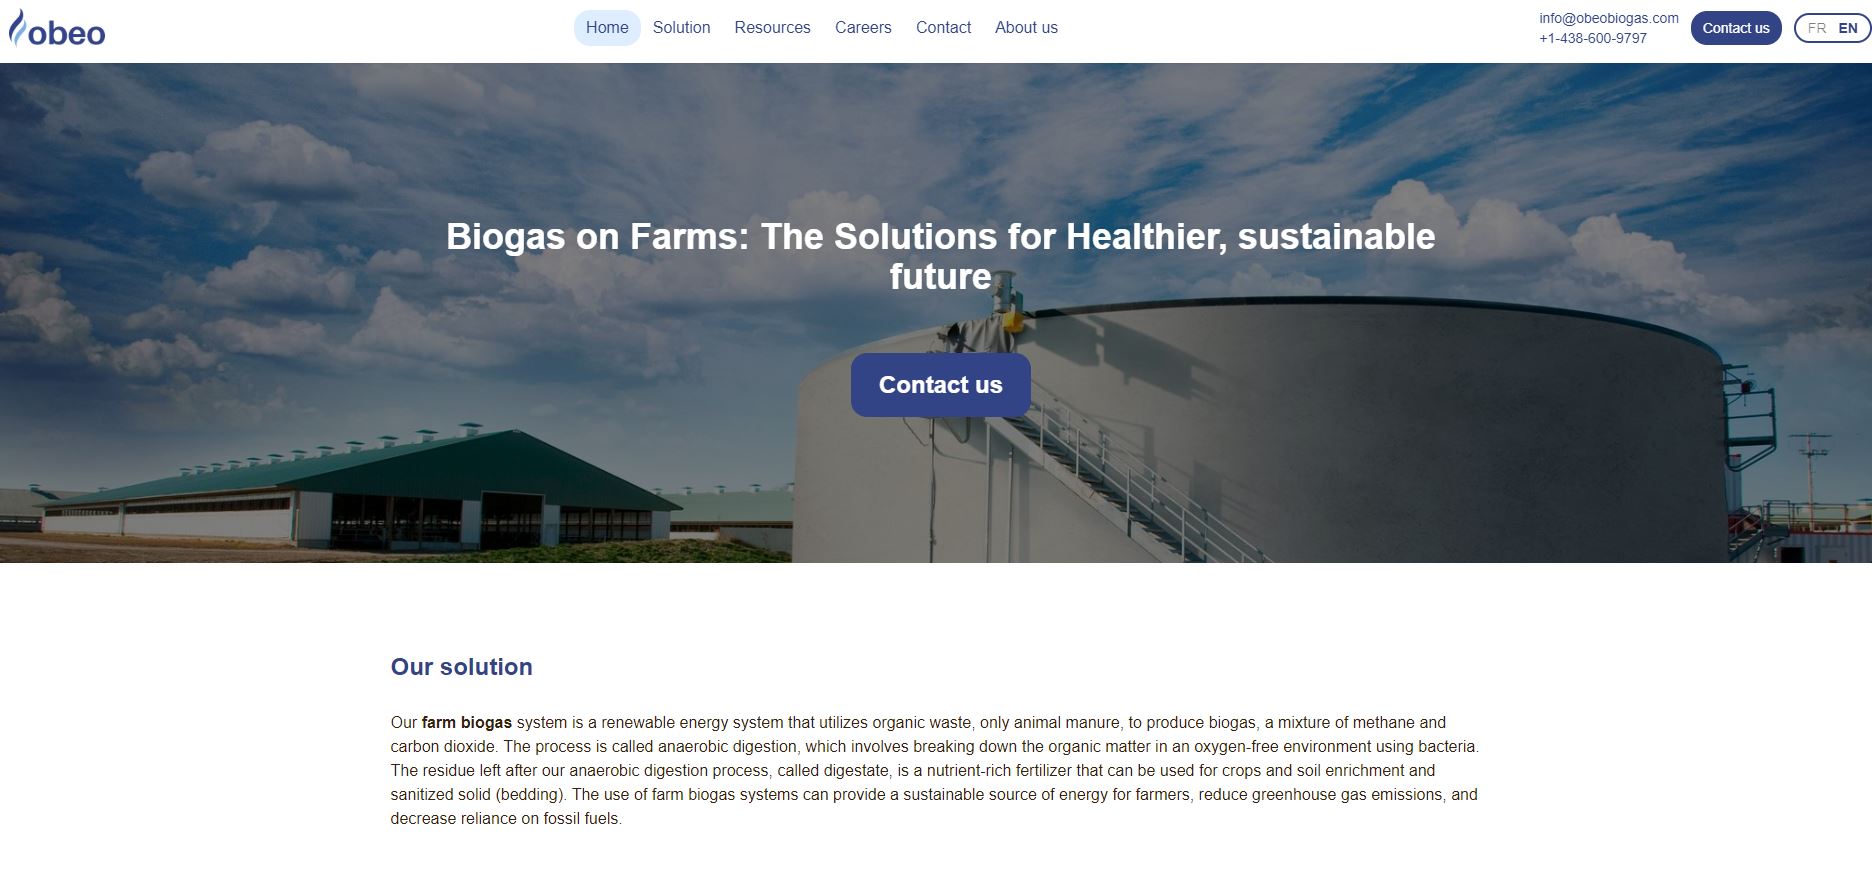 Obeo Biogas, a Montreal-based renewable energy startup has just raised $3 million in seed funding